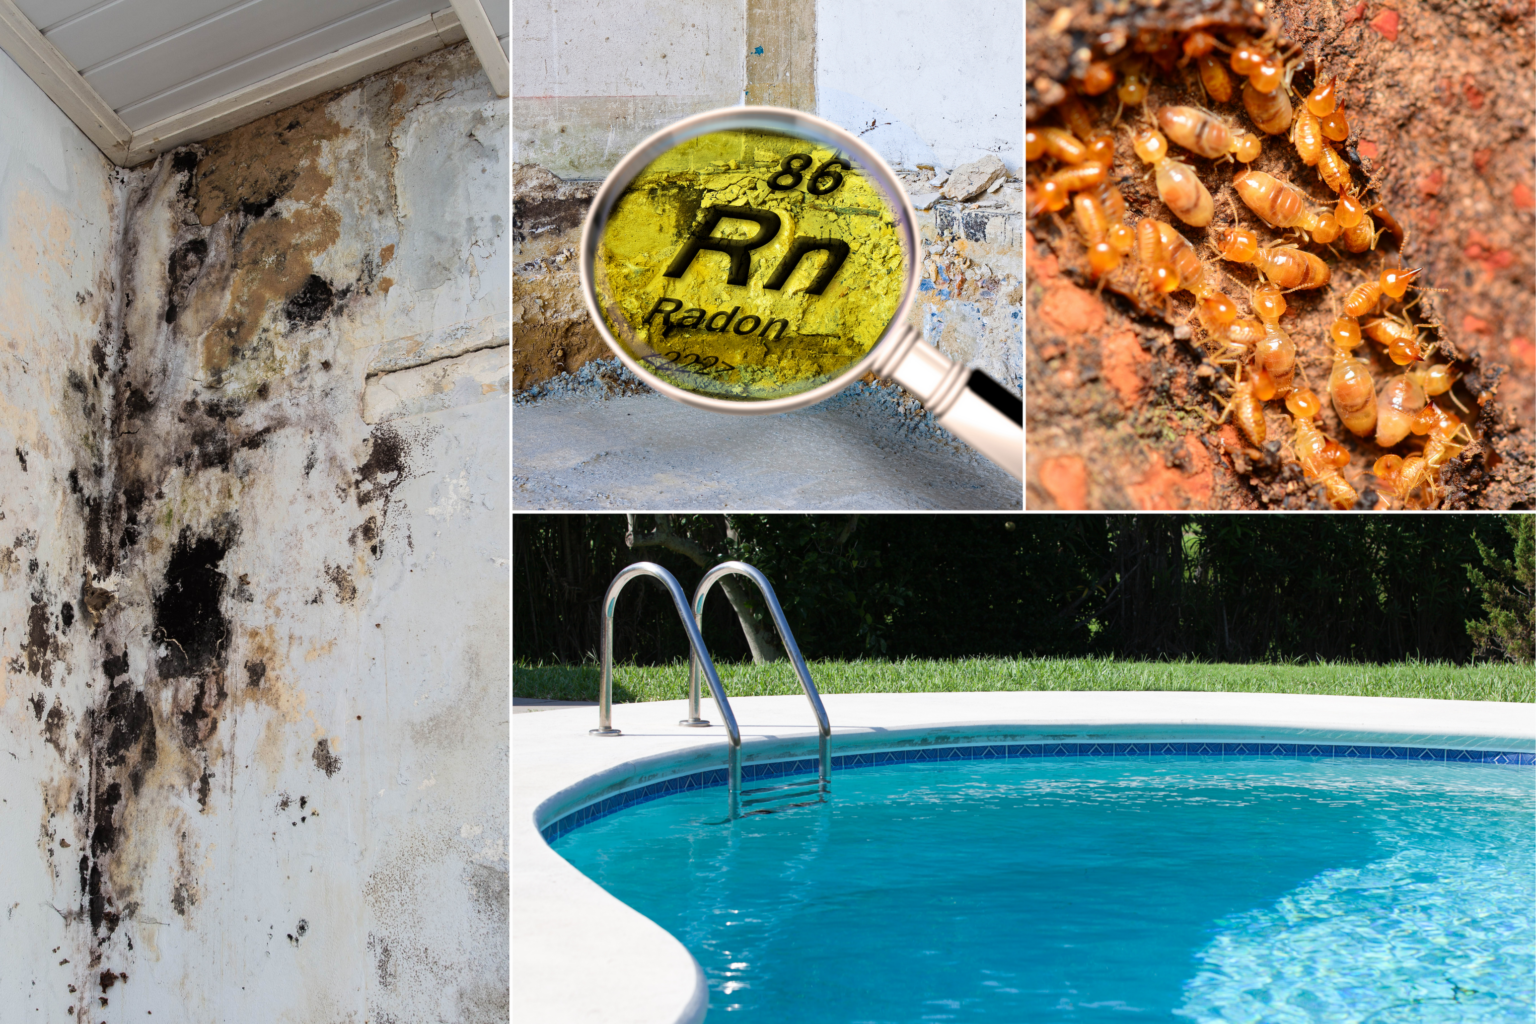 Photo collage of several home inspection additional services an inspector may offer: on the left, a wall of mold-like substances; in the center, a magnifying glass hovering over the chemical element Radon; to the right, a zoomed-in image of termites; and on the bottom, a pool with a ladder.